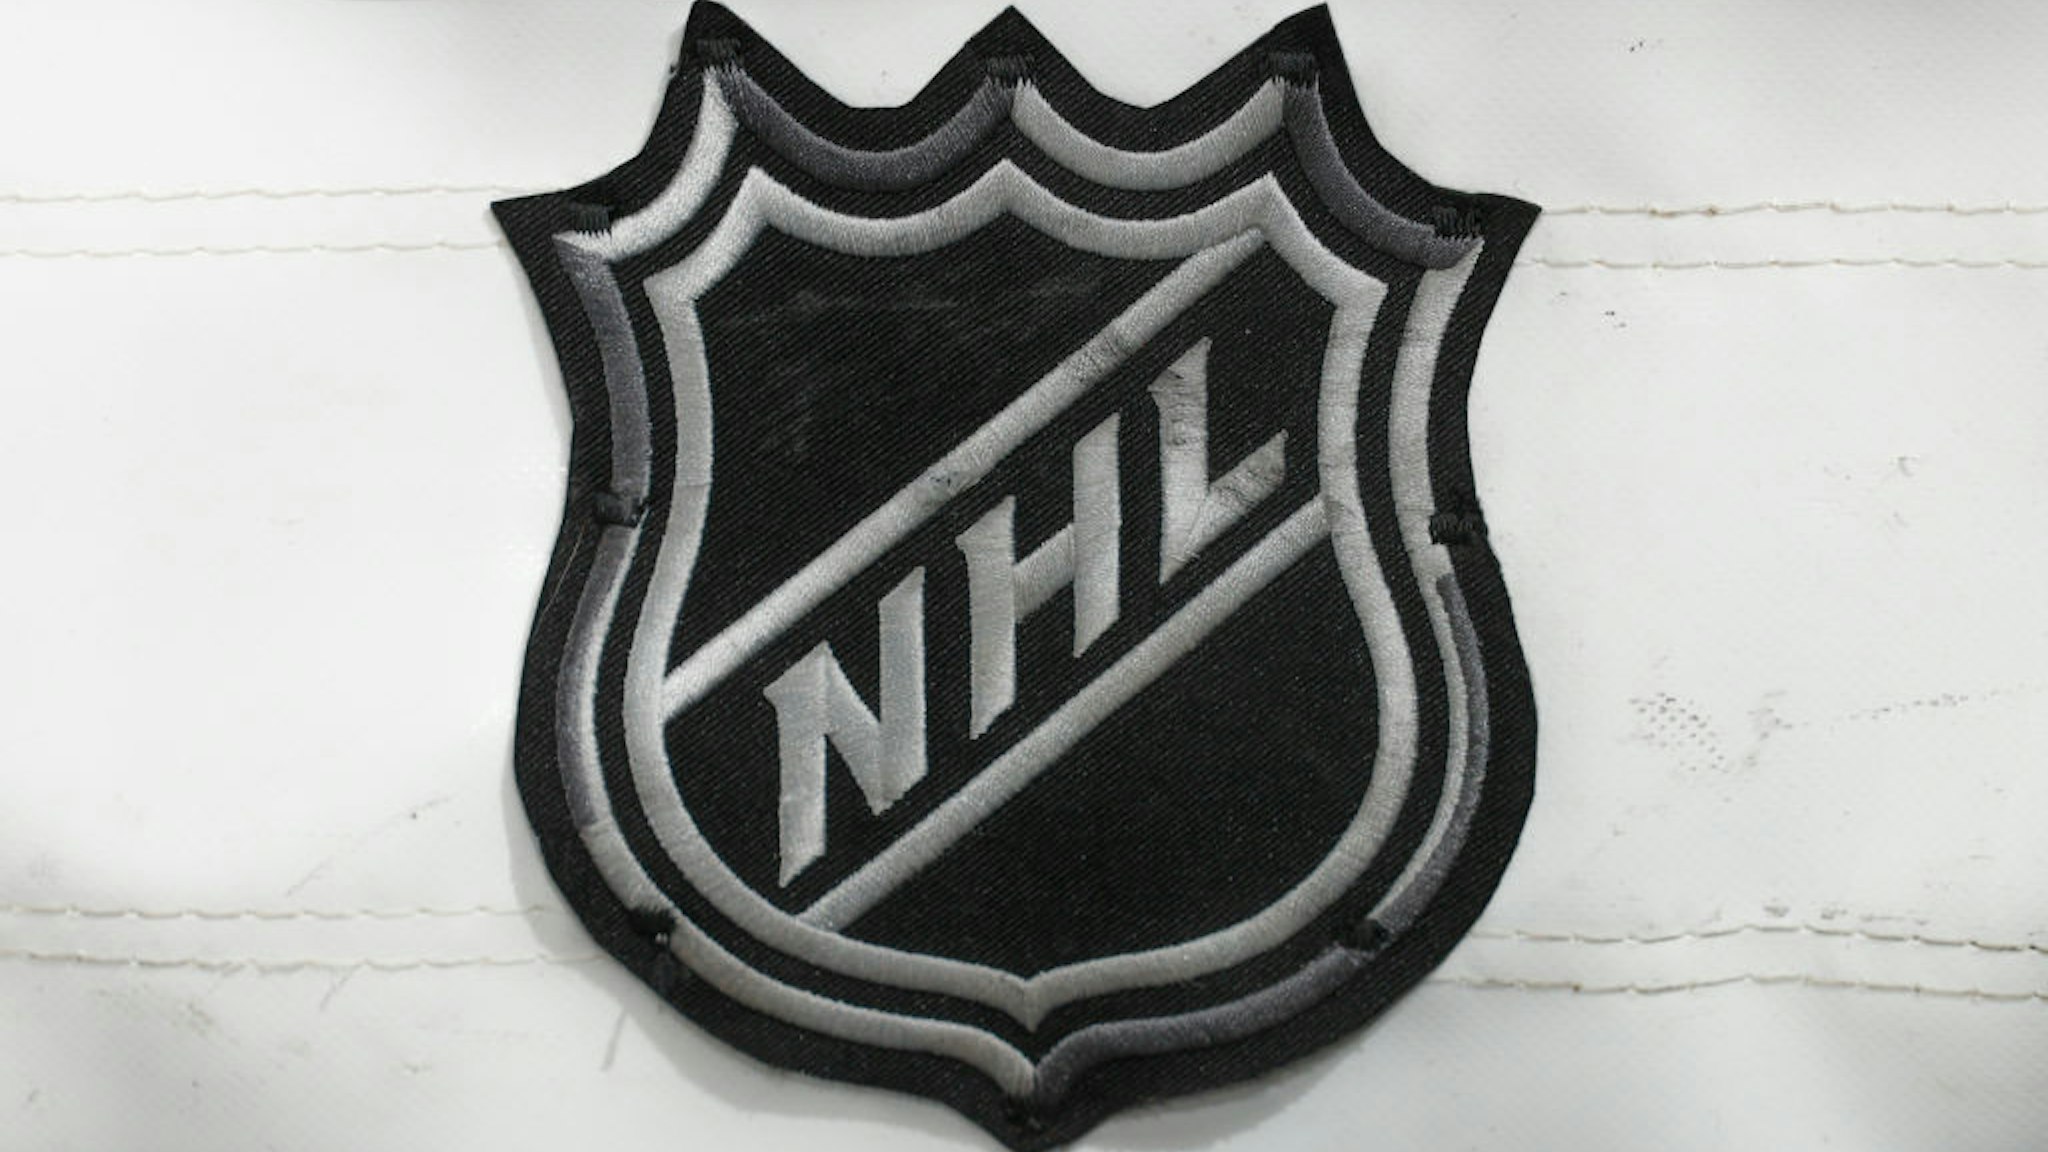 NEWARK, NJ - APRIL 29: A general view of the National Hockey League logo on the back of the goal on April 29, 2022 at the Prudential Center in Newark, New Jersey. (Photo by Rich Graessle/Getty Images)